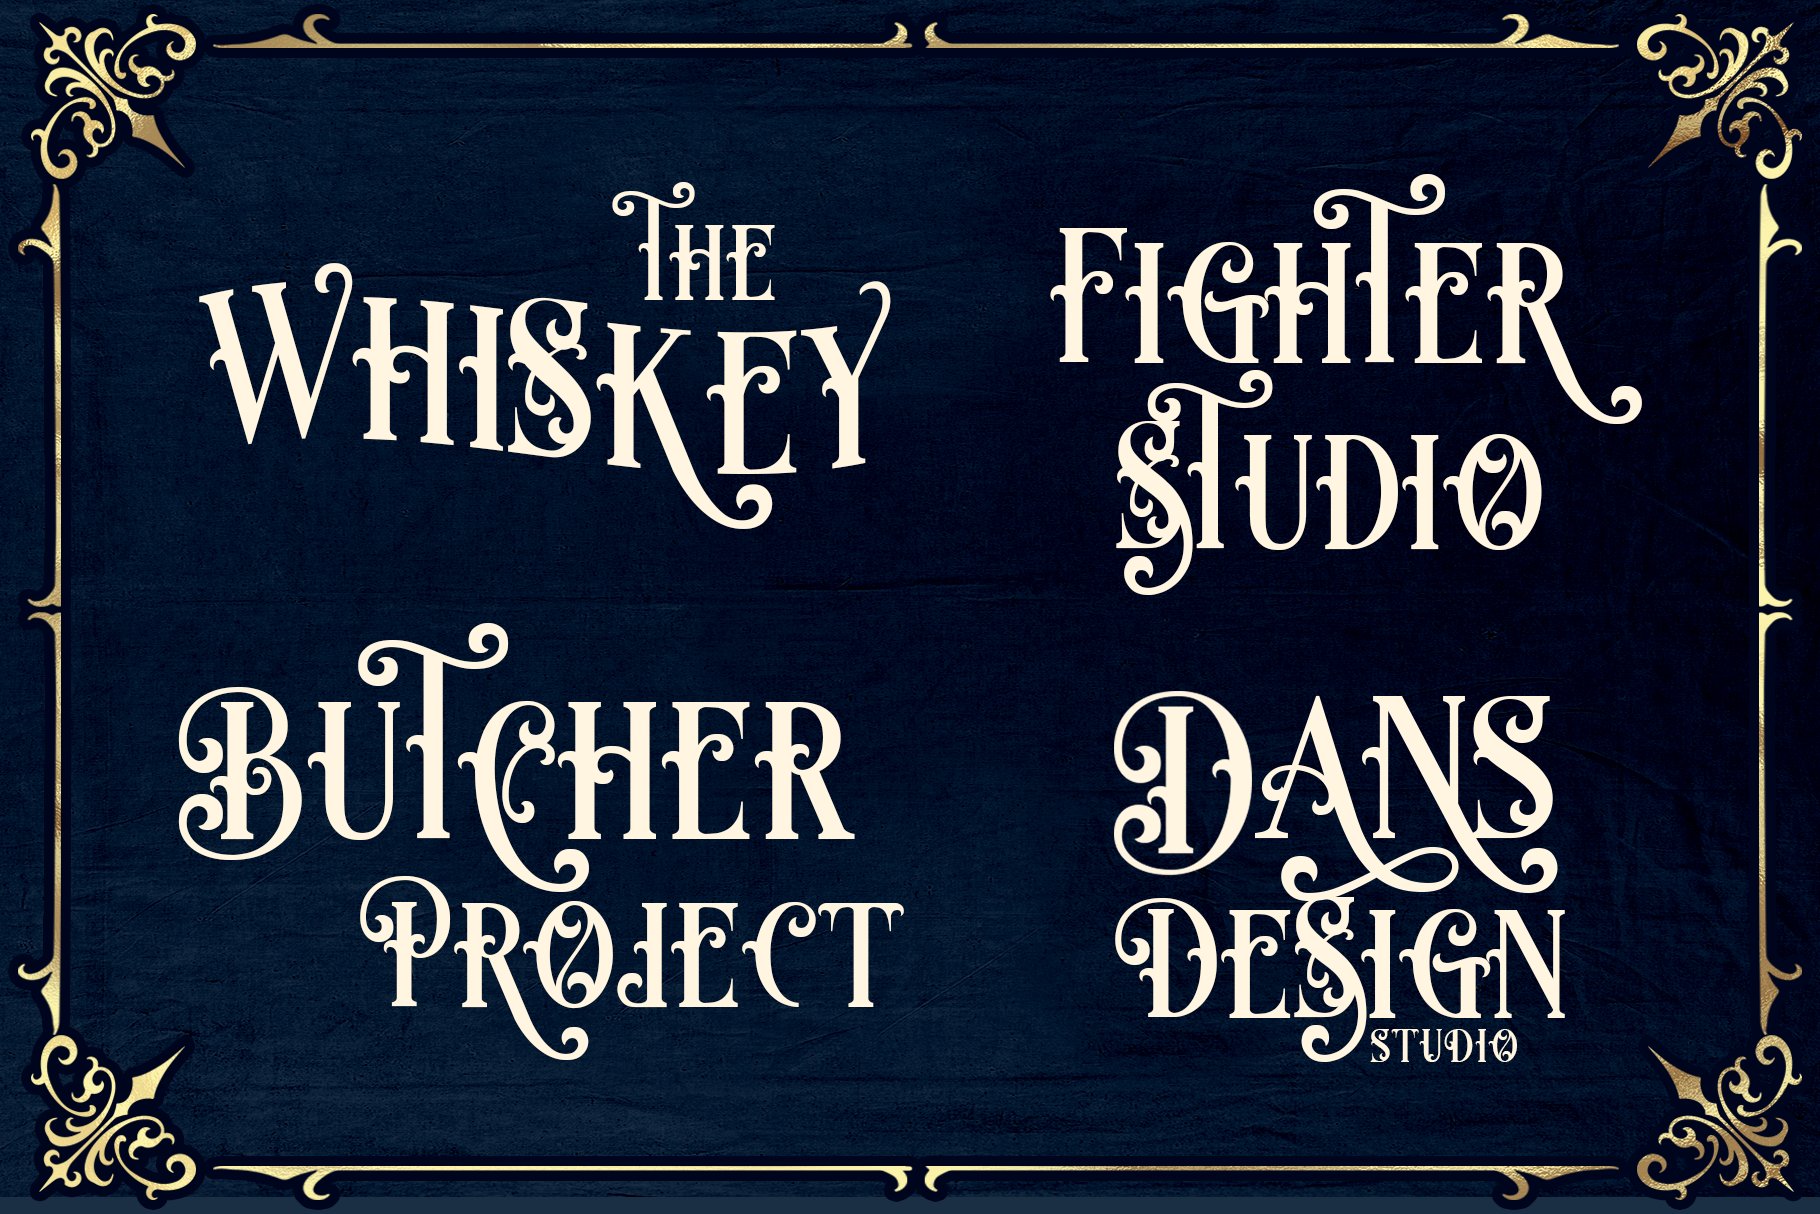 Shoster luxury Blackletter preview image.